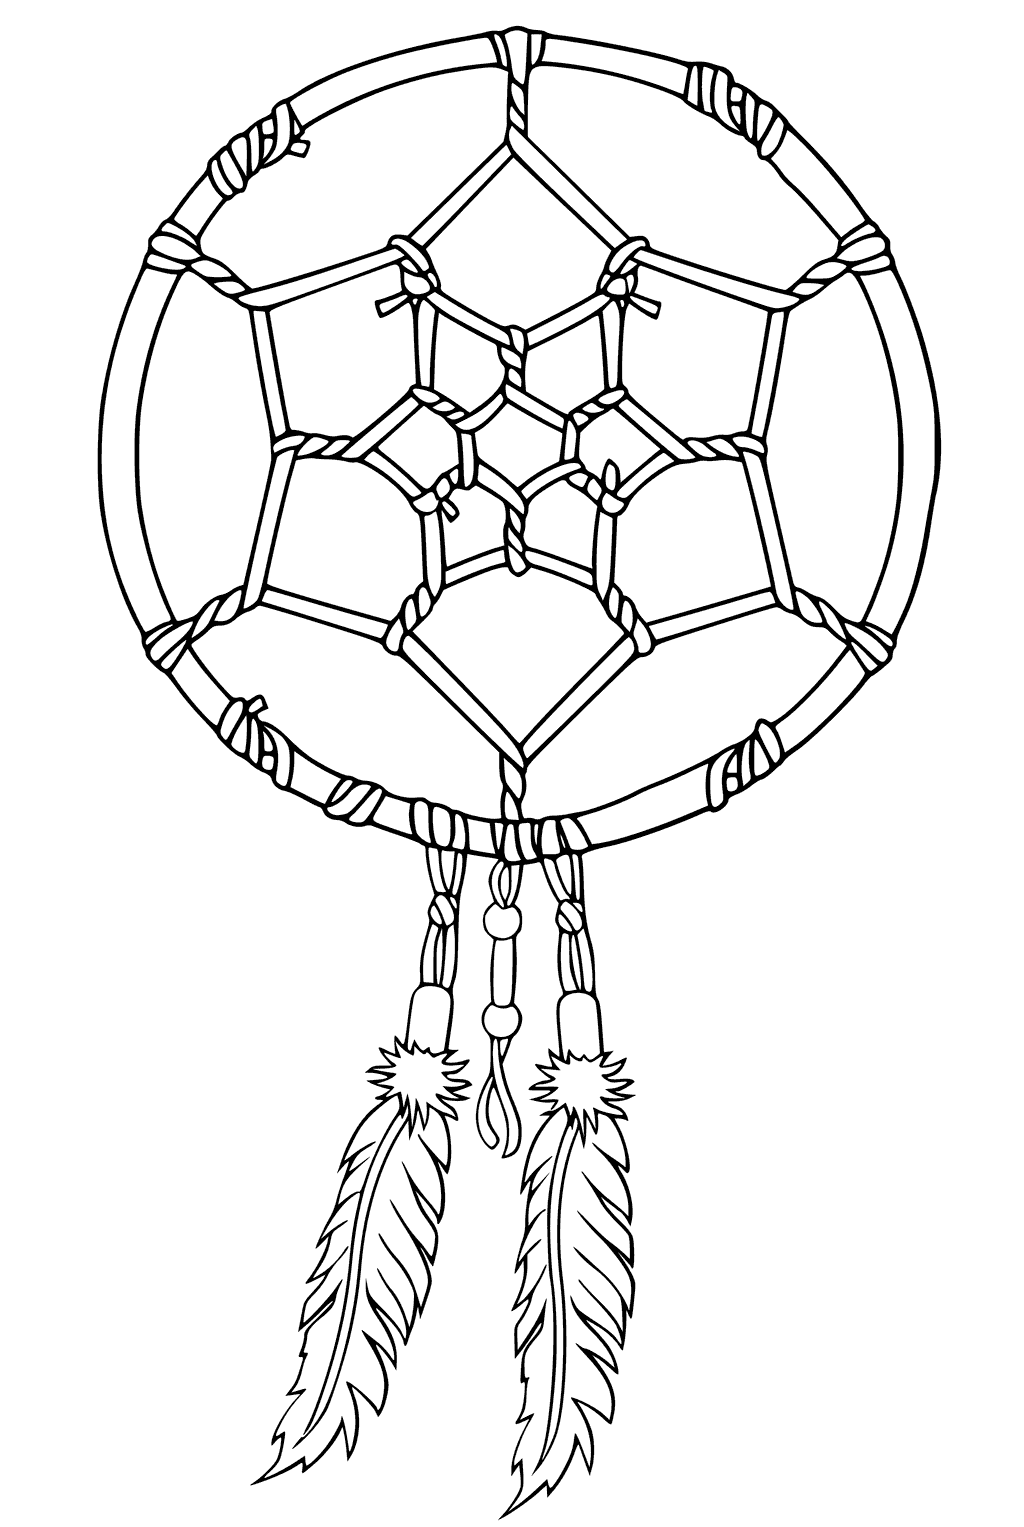 Dreamcatcher Printable Coloring Pages at GetColorings.com | Free ...